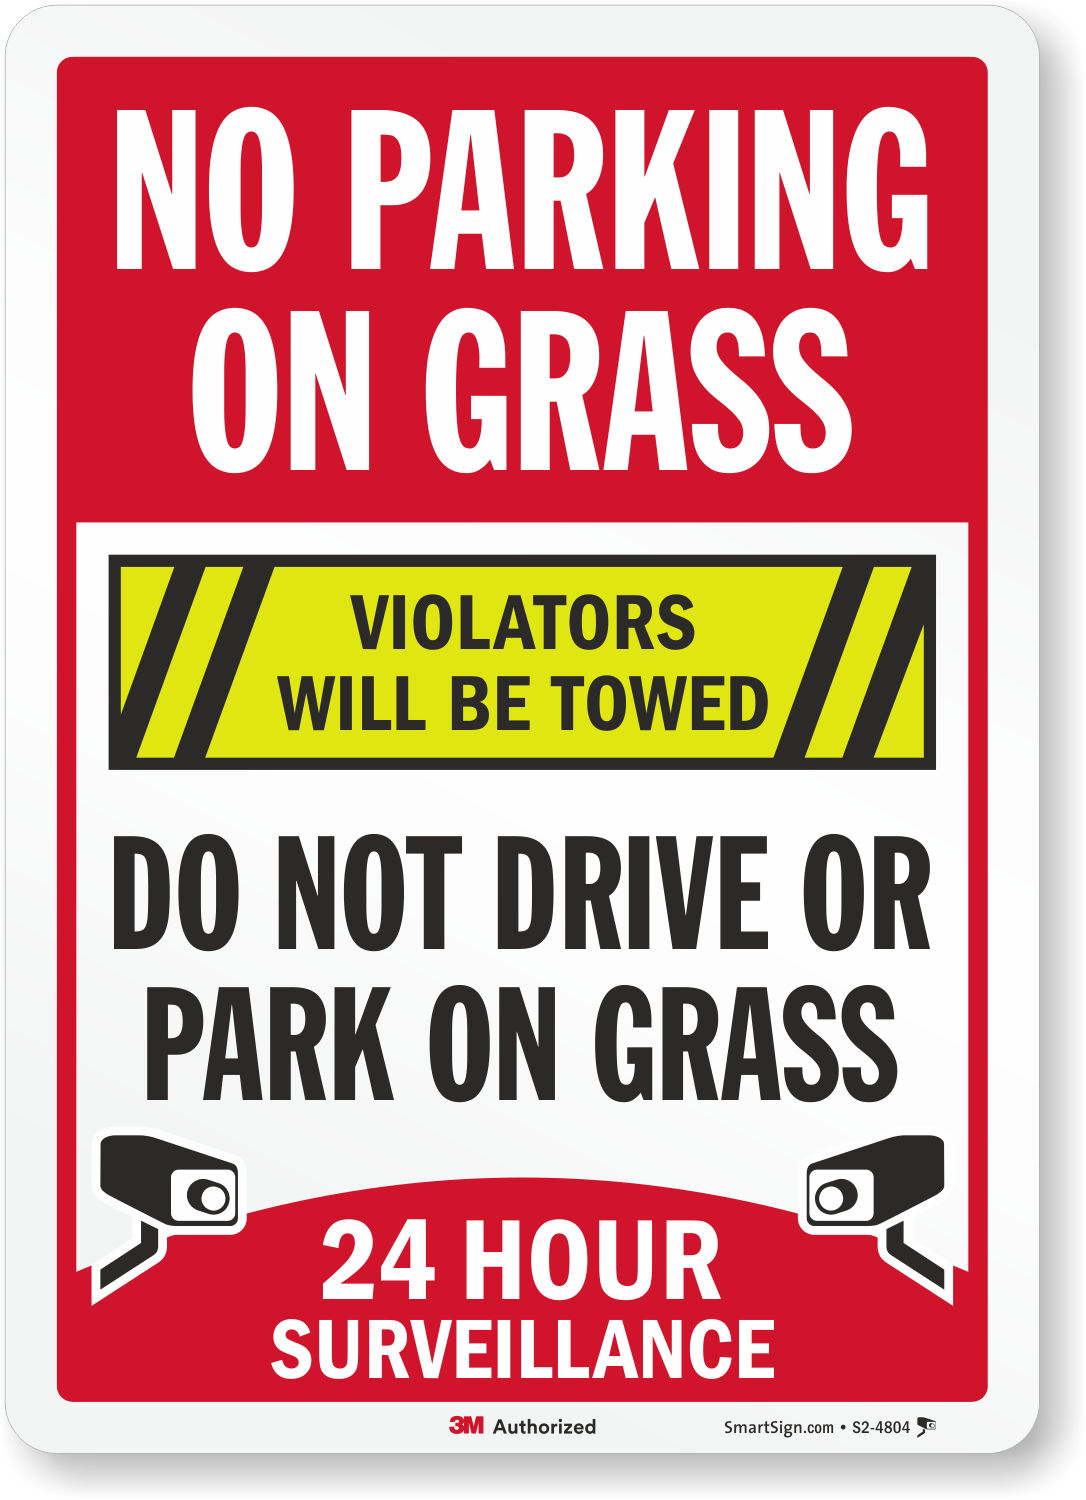 No Parking on the Grass Signs – MyParkingSign